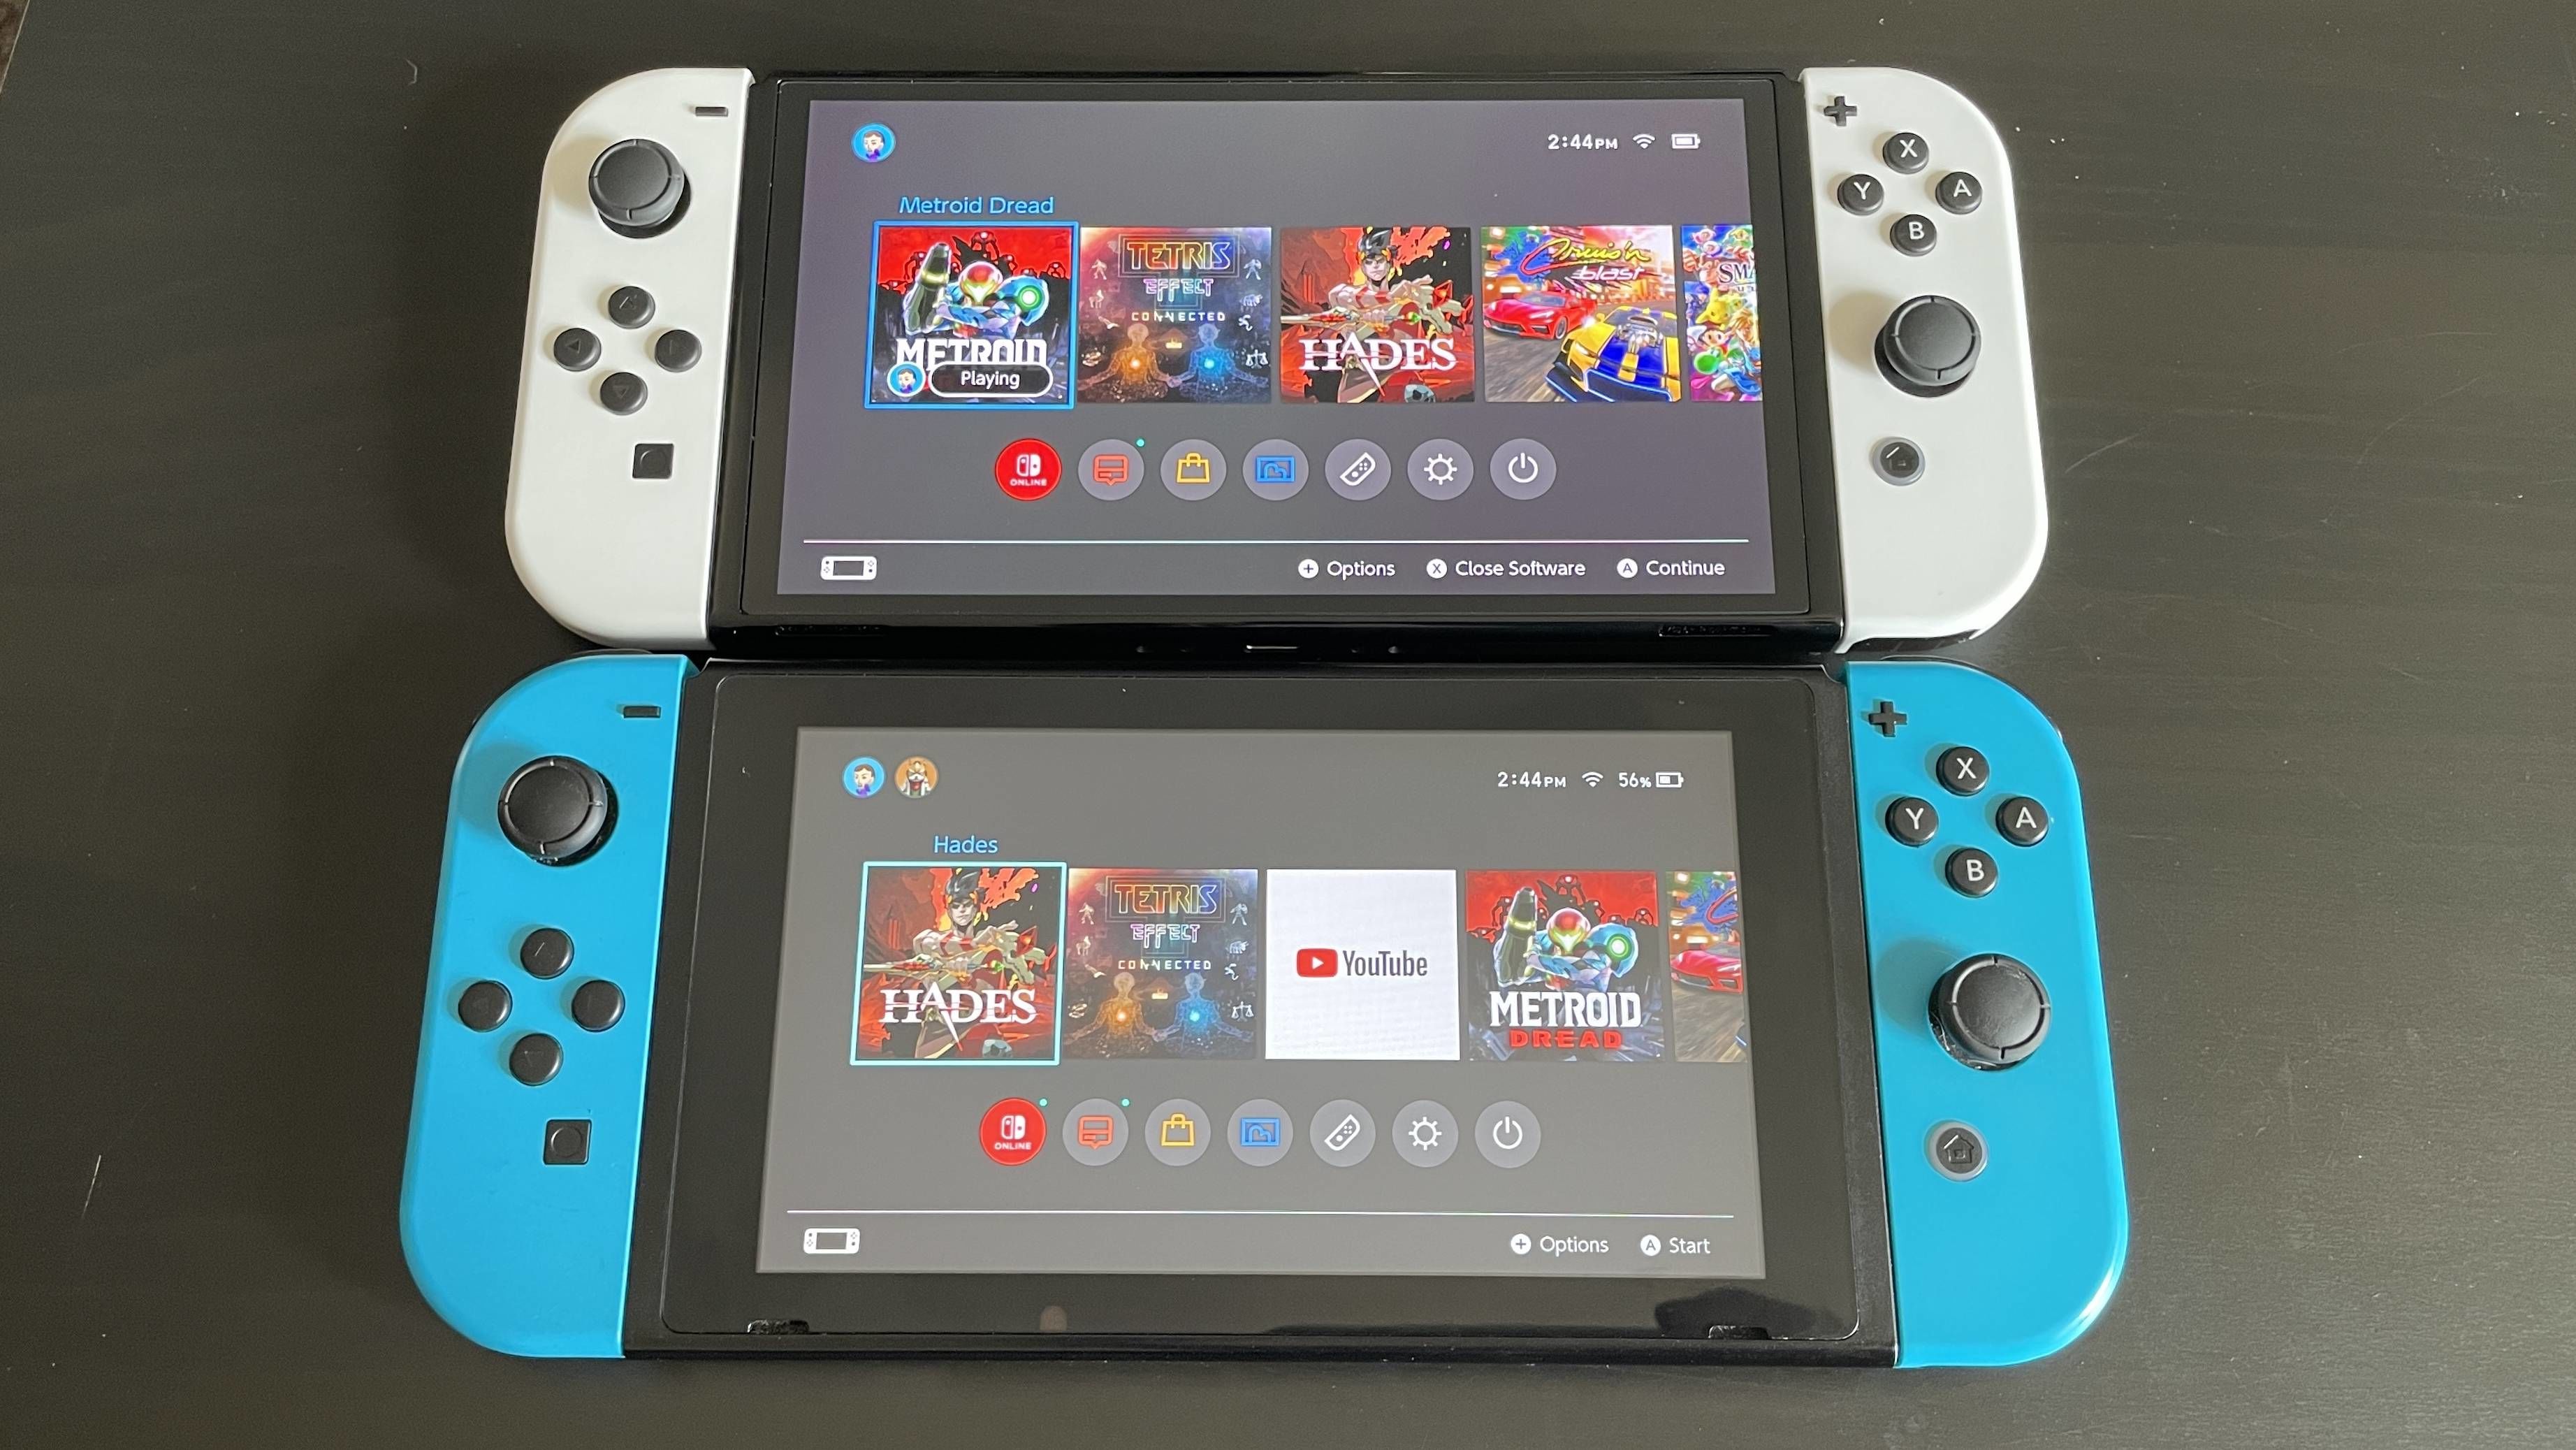 Best Nintendo Switch games list: The best Nintendo Switch games that every  gamer will enjoy 